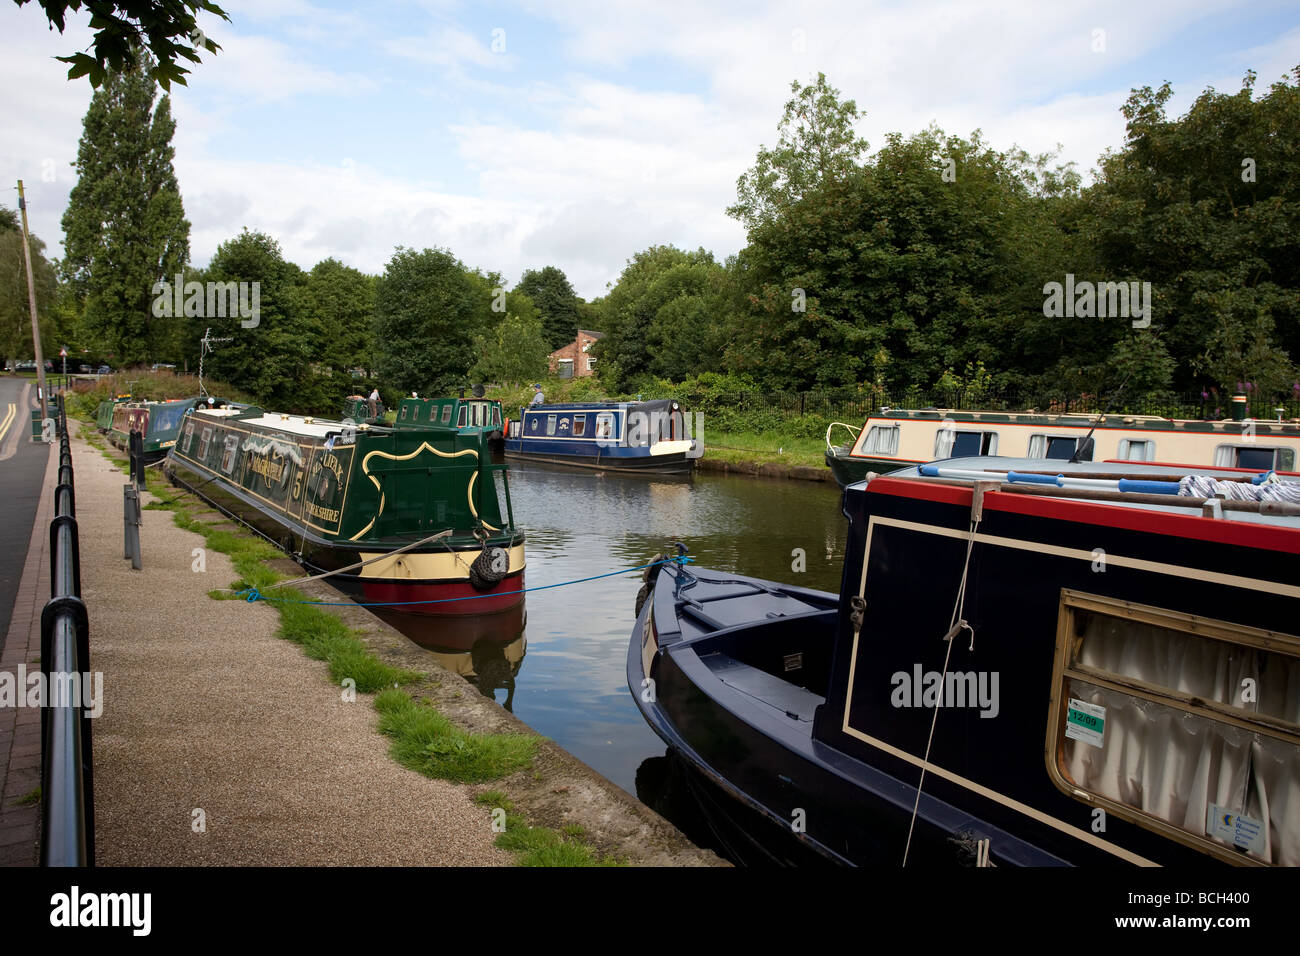 Canal and boats in Lymm, Warrington, Cheshire, England Stock Photo